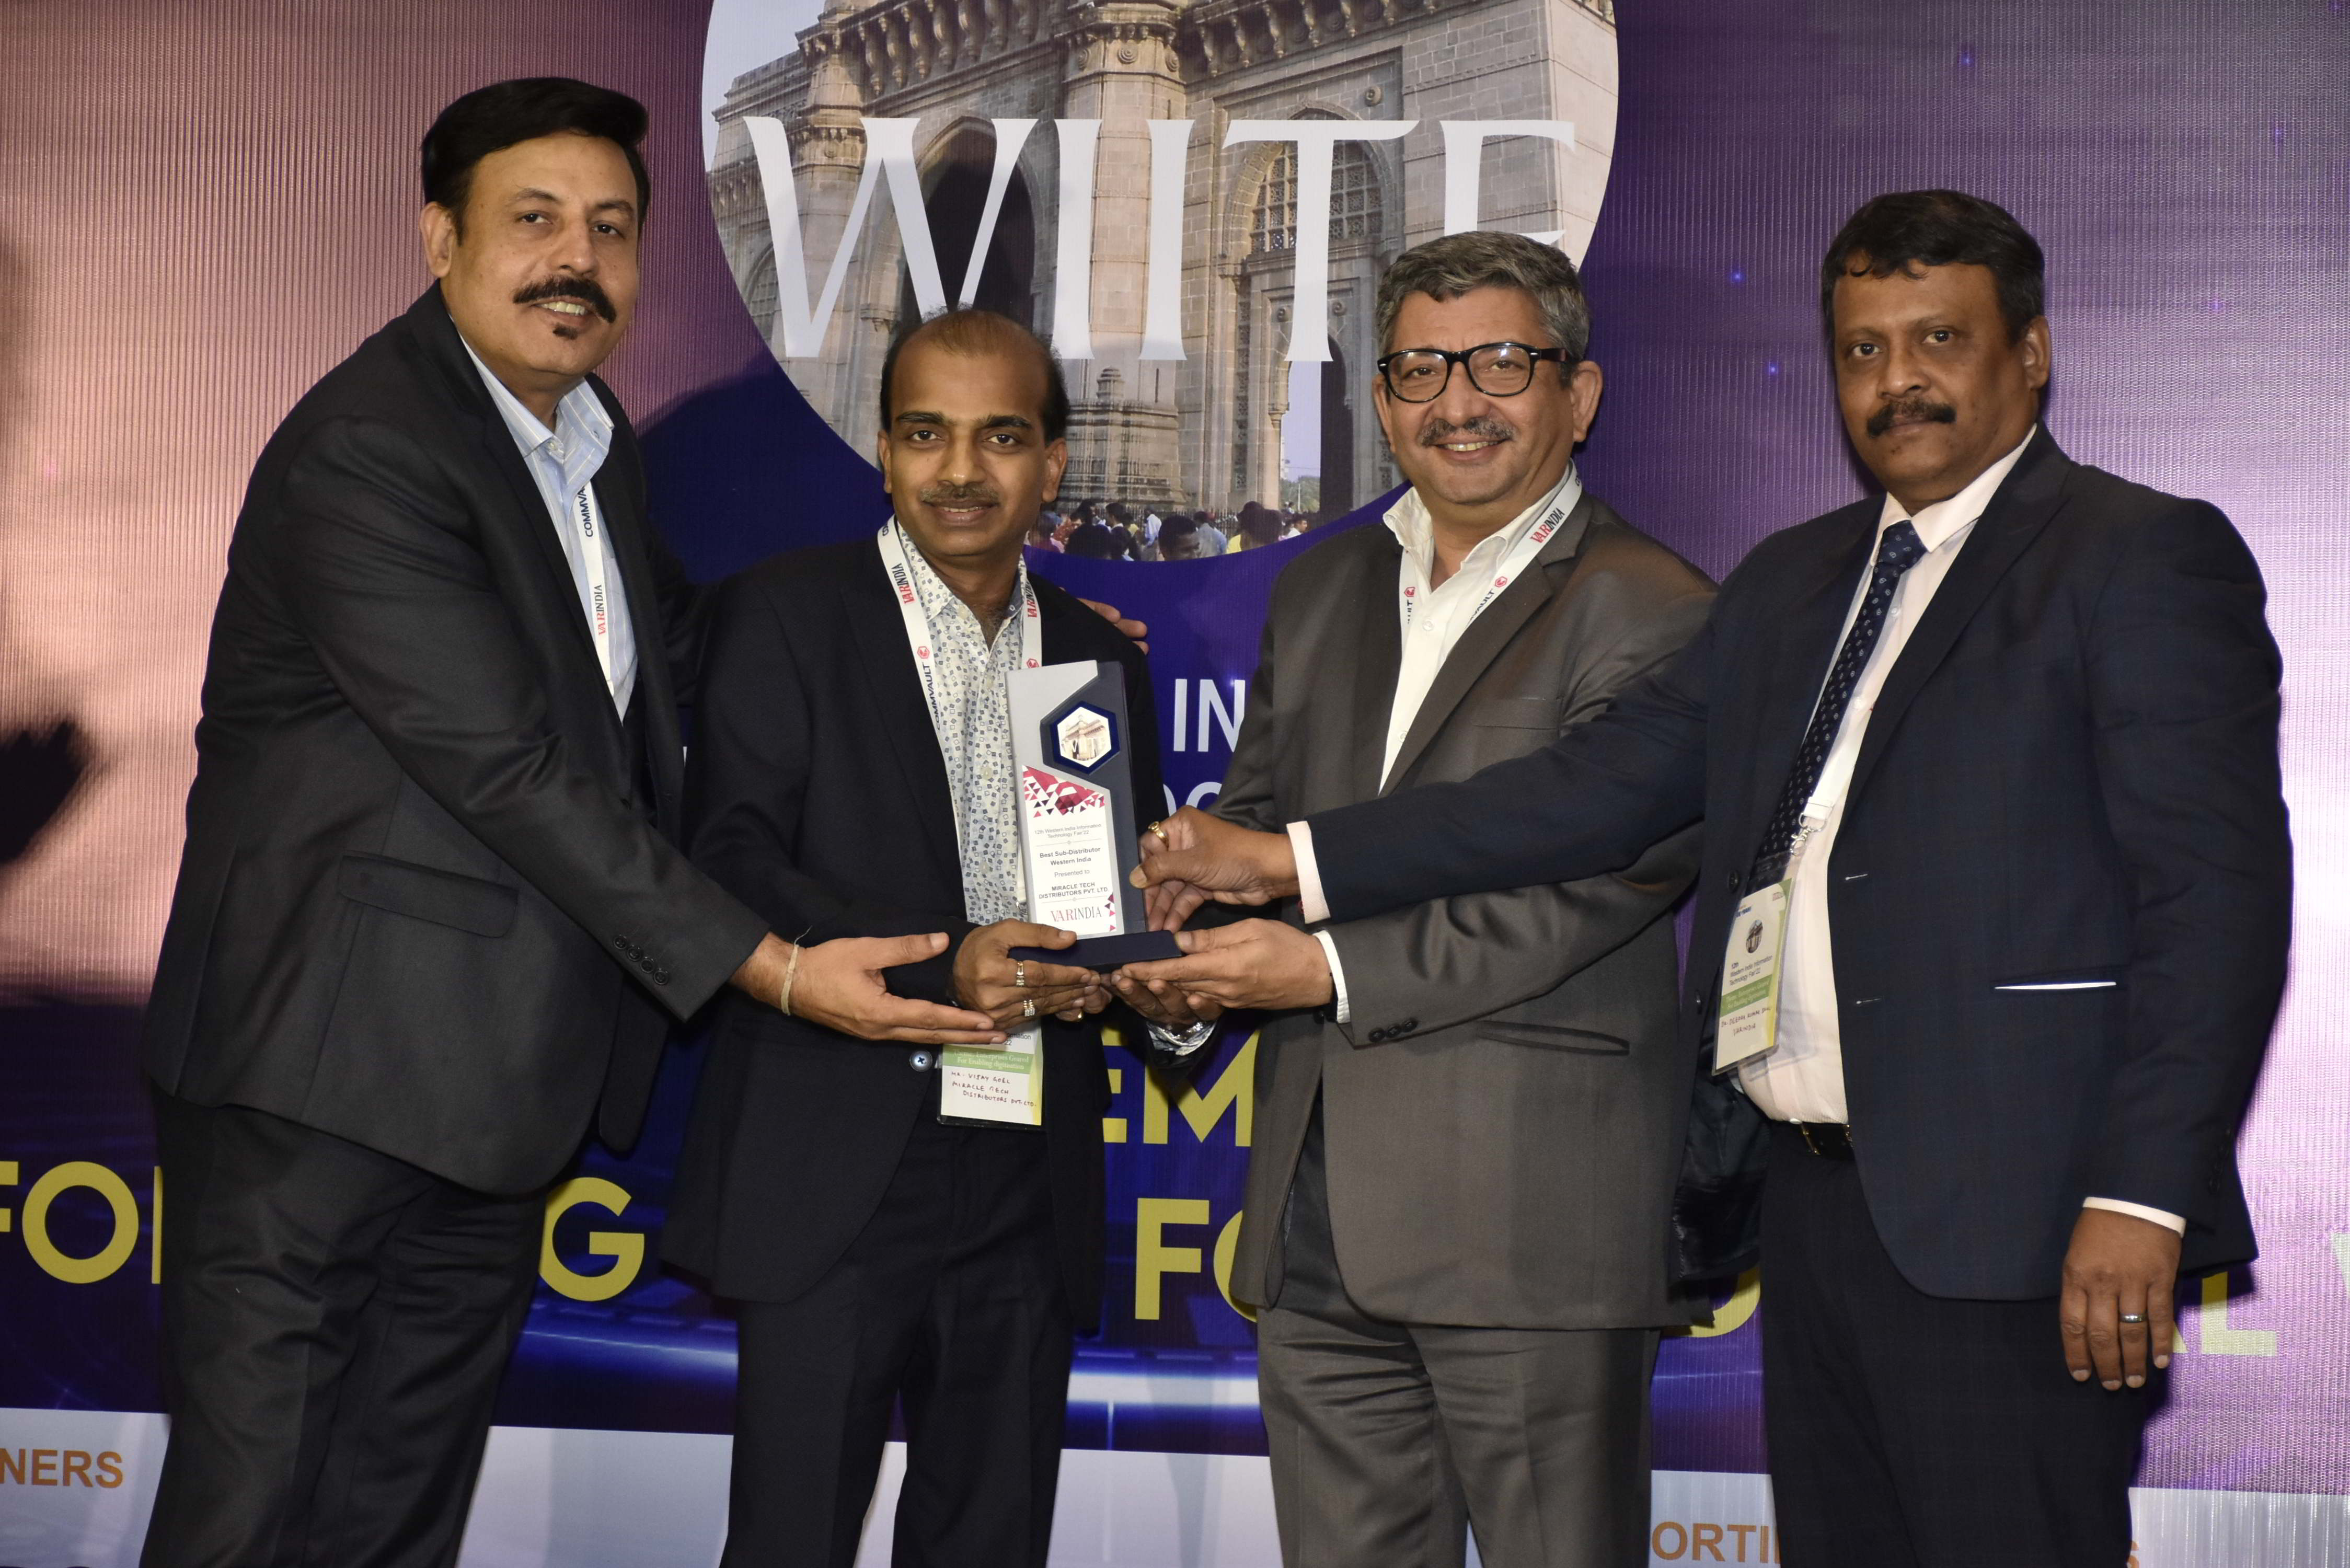 The Best Sub-Distributor, Western India went to Miracle Tech Distributors Pvt. Ltd.